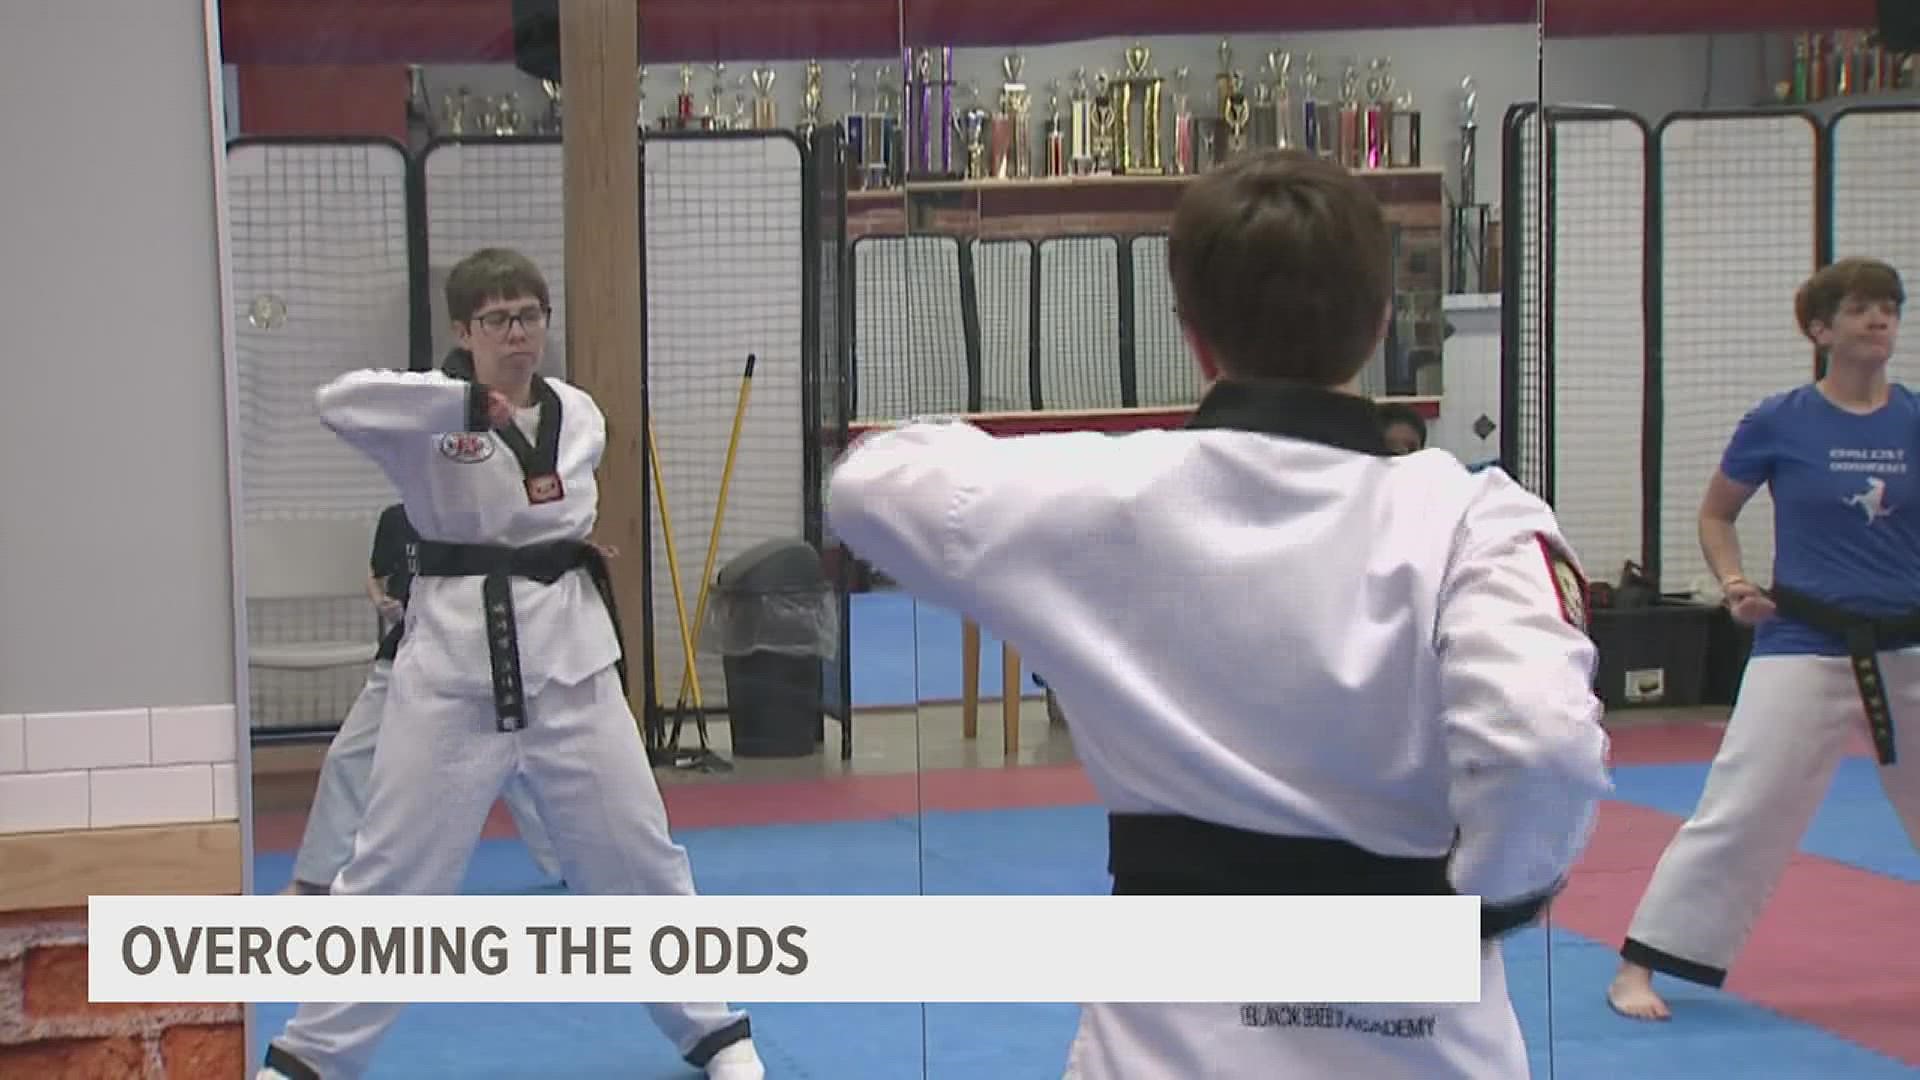 Margaret Granato had a stroke at birth, leaving her without the ability to fully use the left side of her body. Her taekwondo training has helped her persevere.